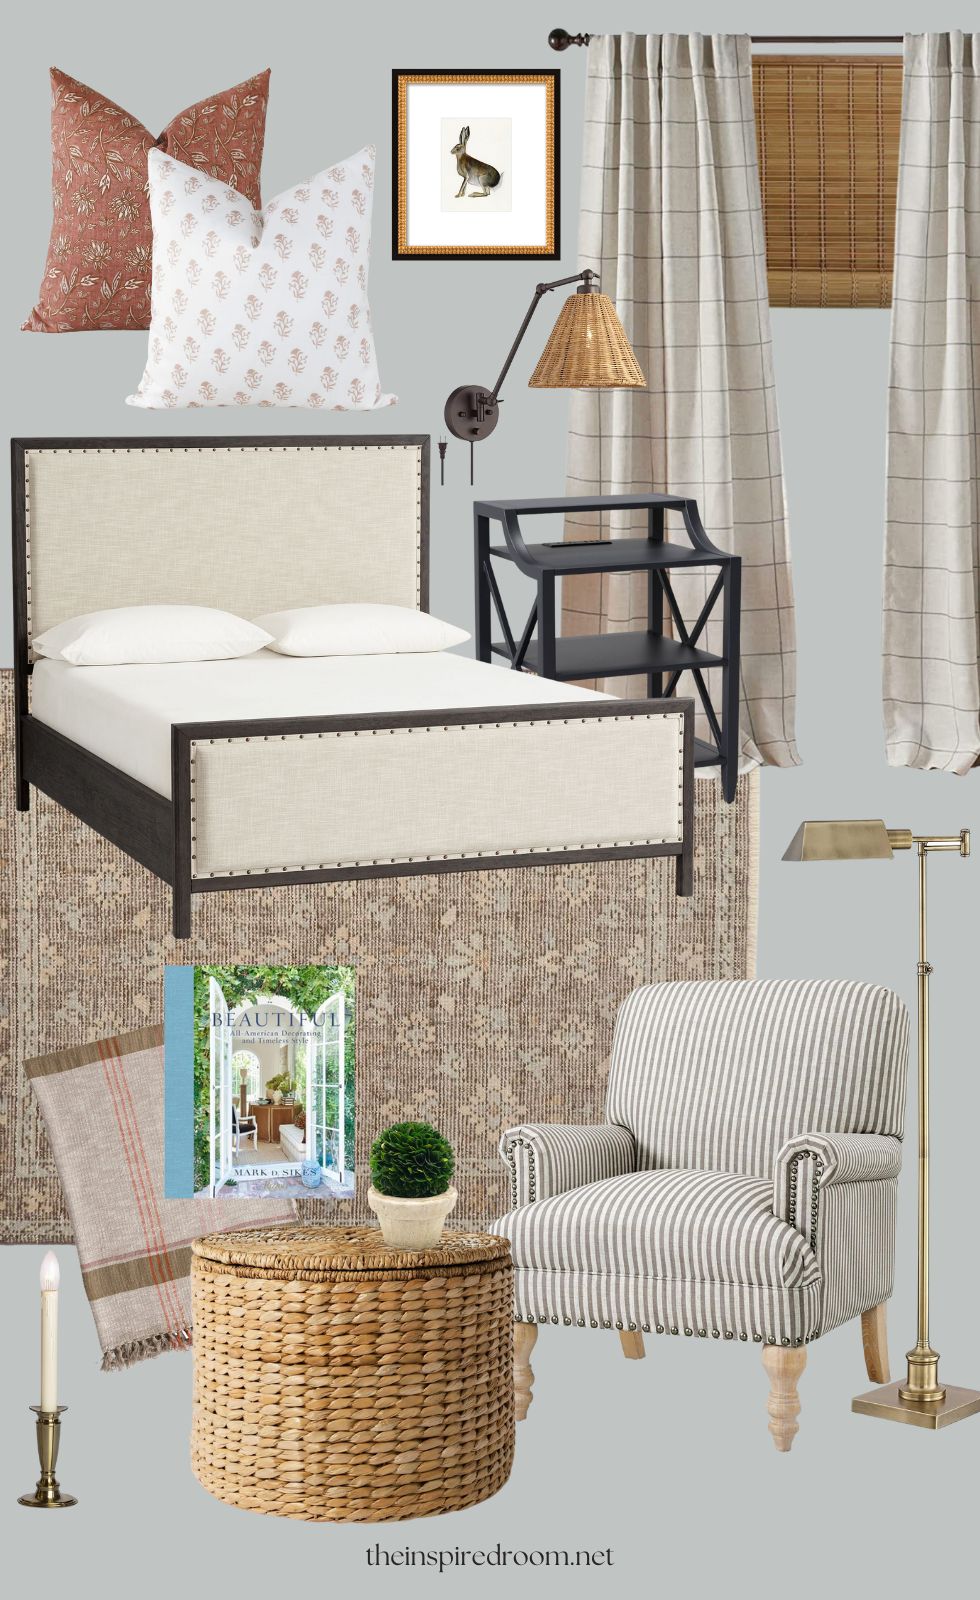 A cozy neutral bedroom mood board (with a layered mix of subtle patterns, warm textures and a bit of gorgeous color!)